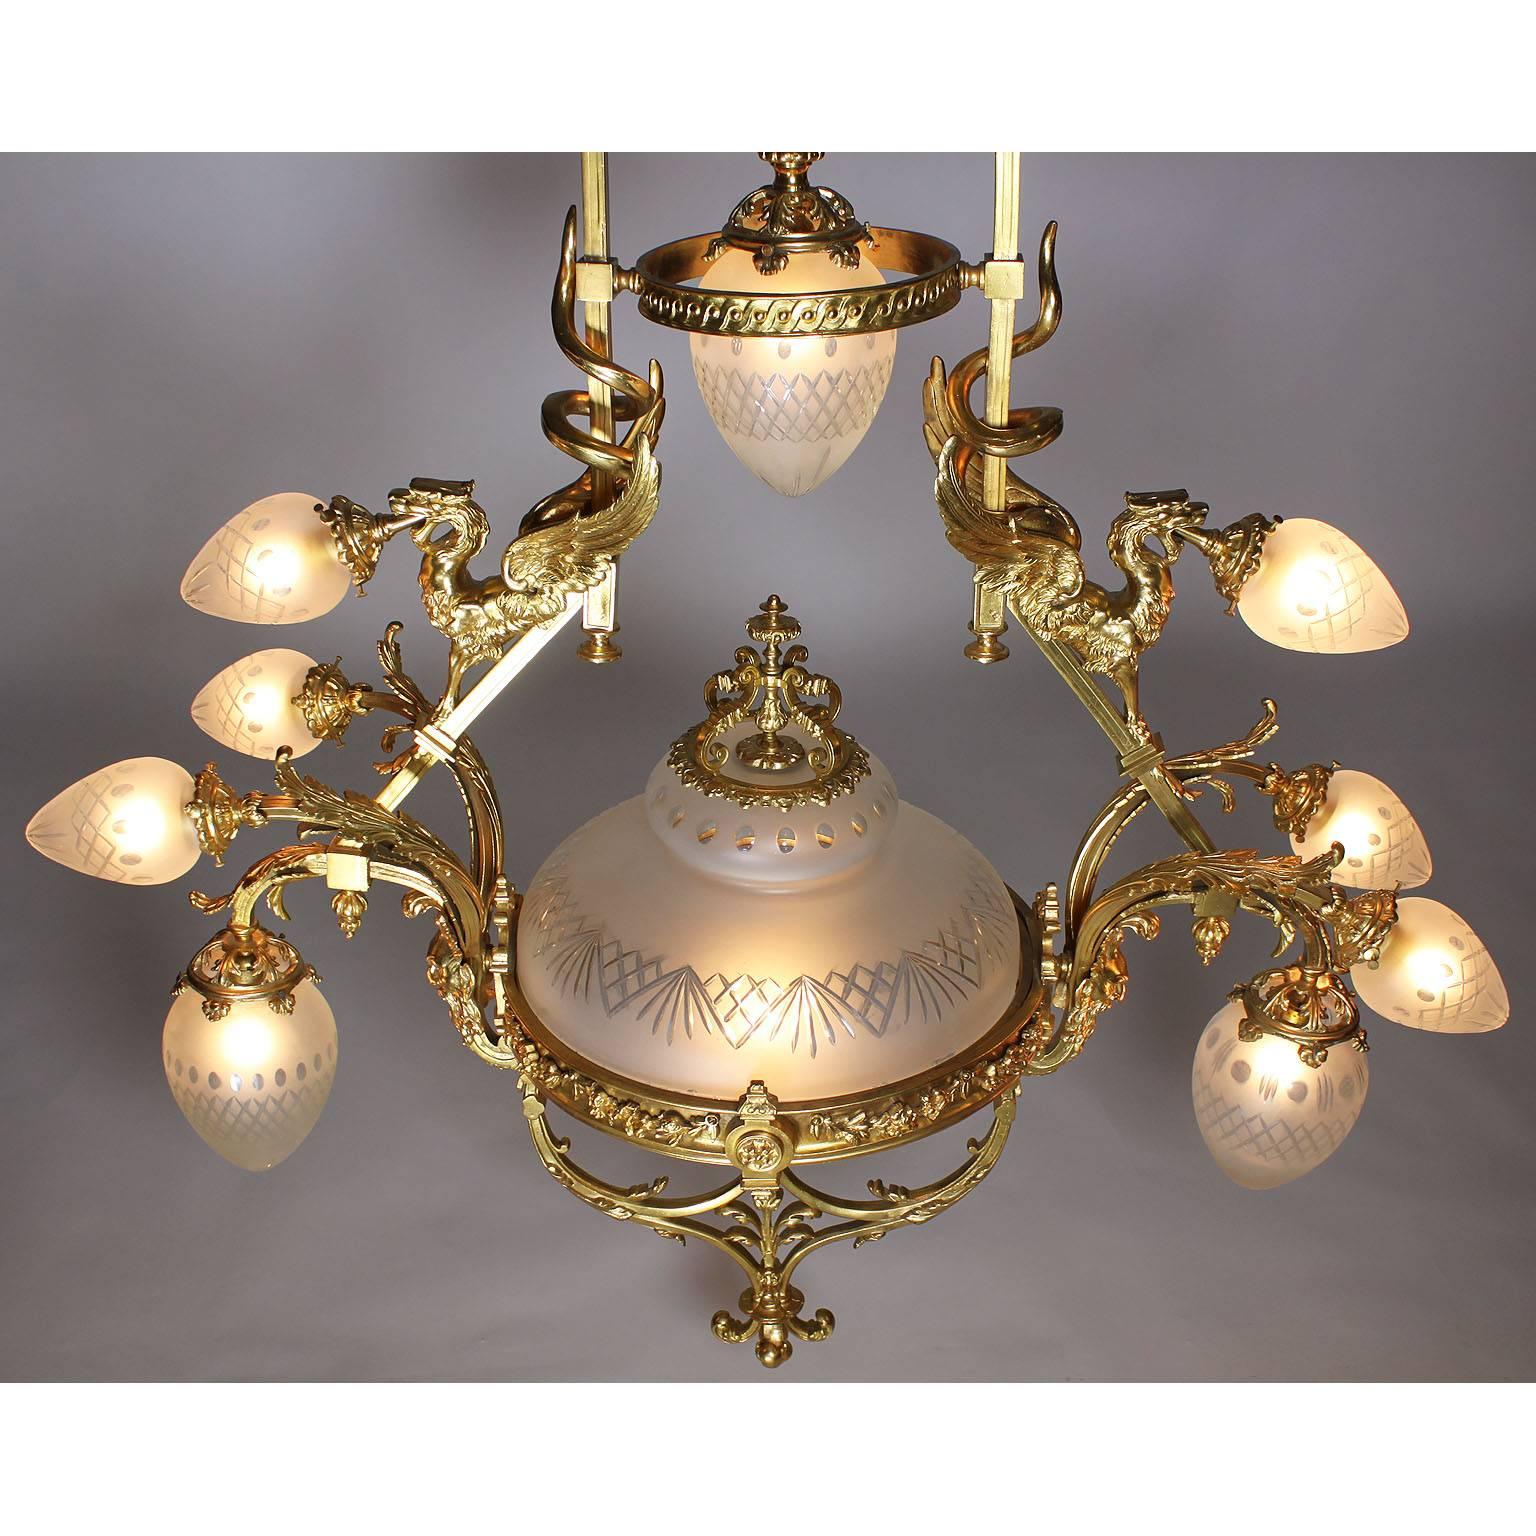 Neoclassical Revival French Belle Epoque 19th-20th Century Neoclassical Style Gilt-Bronze Chandelier For Sale